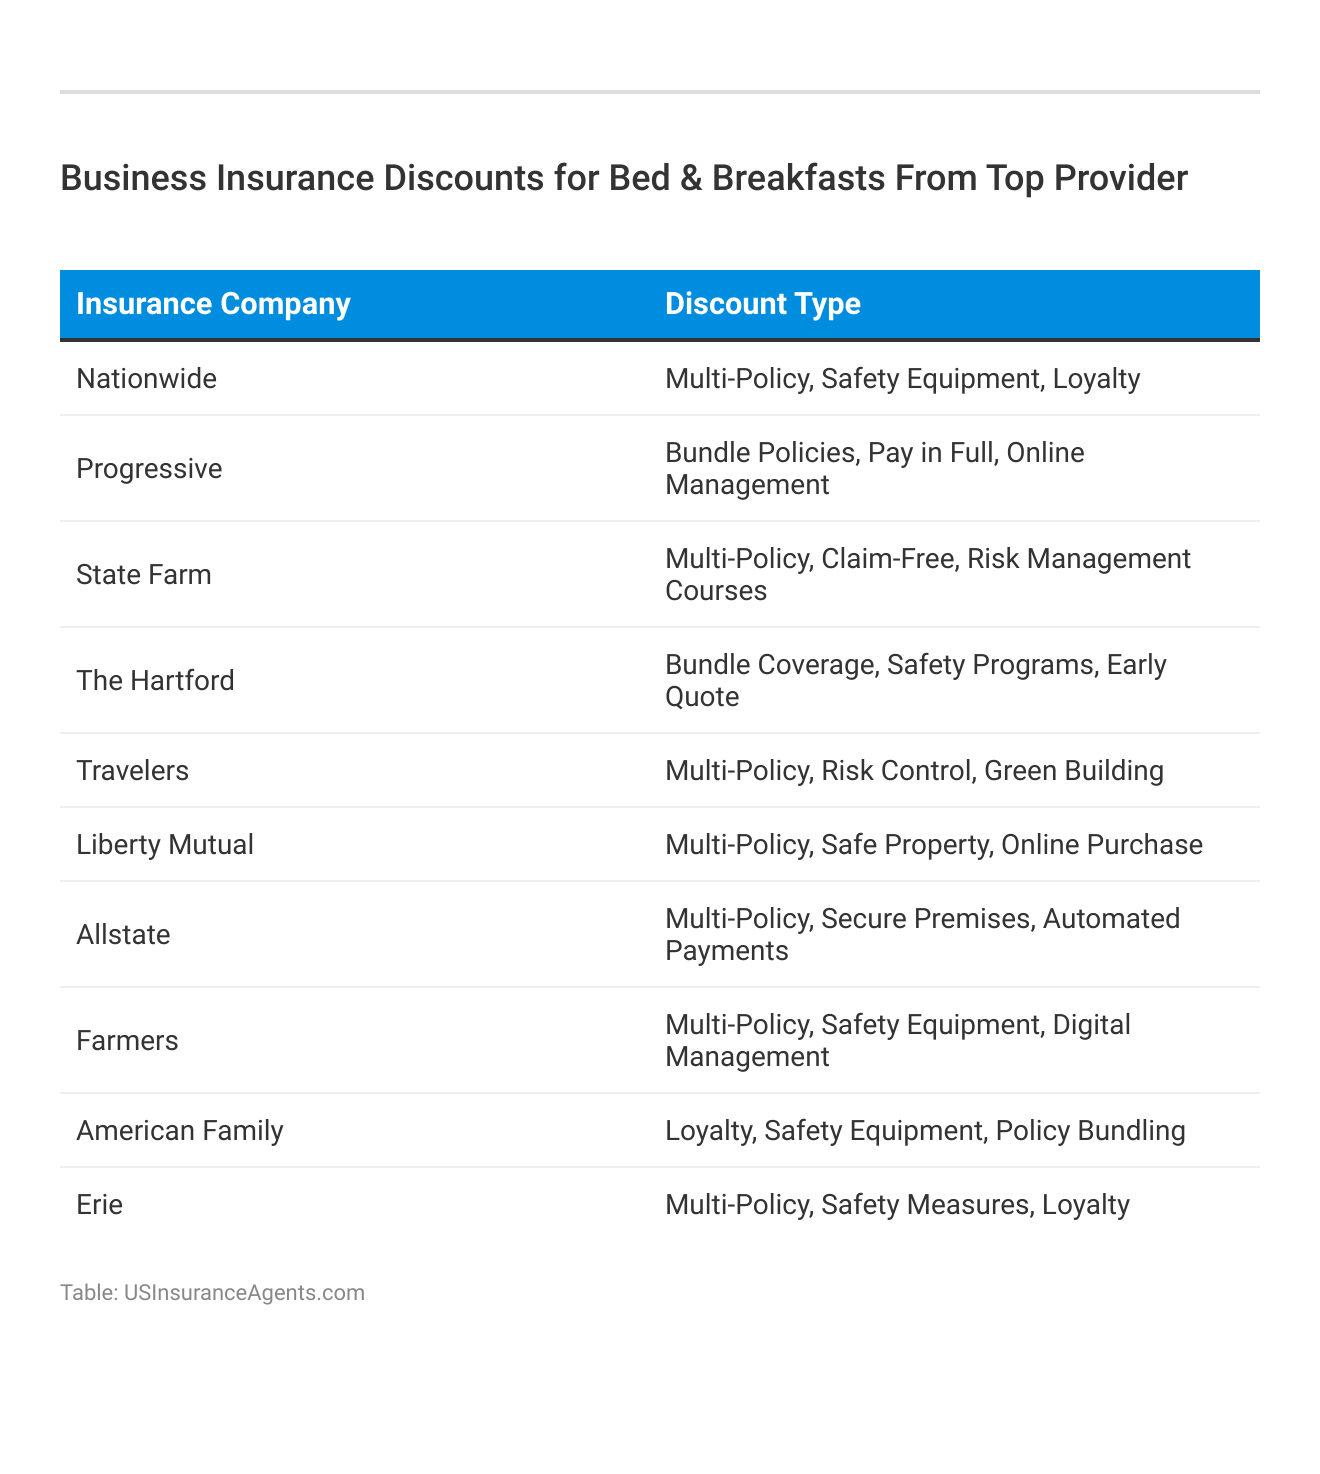 <h3>Business Insurance Discounts for Bed & Breakfasts From Top Provider</h3>